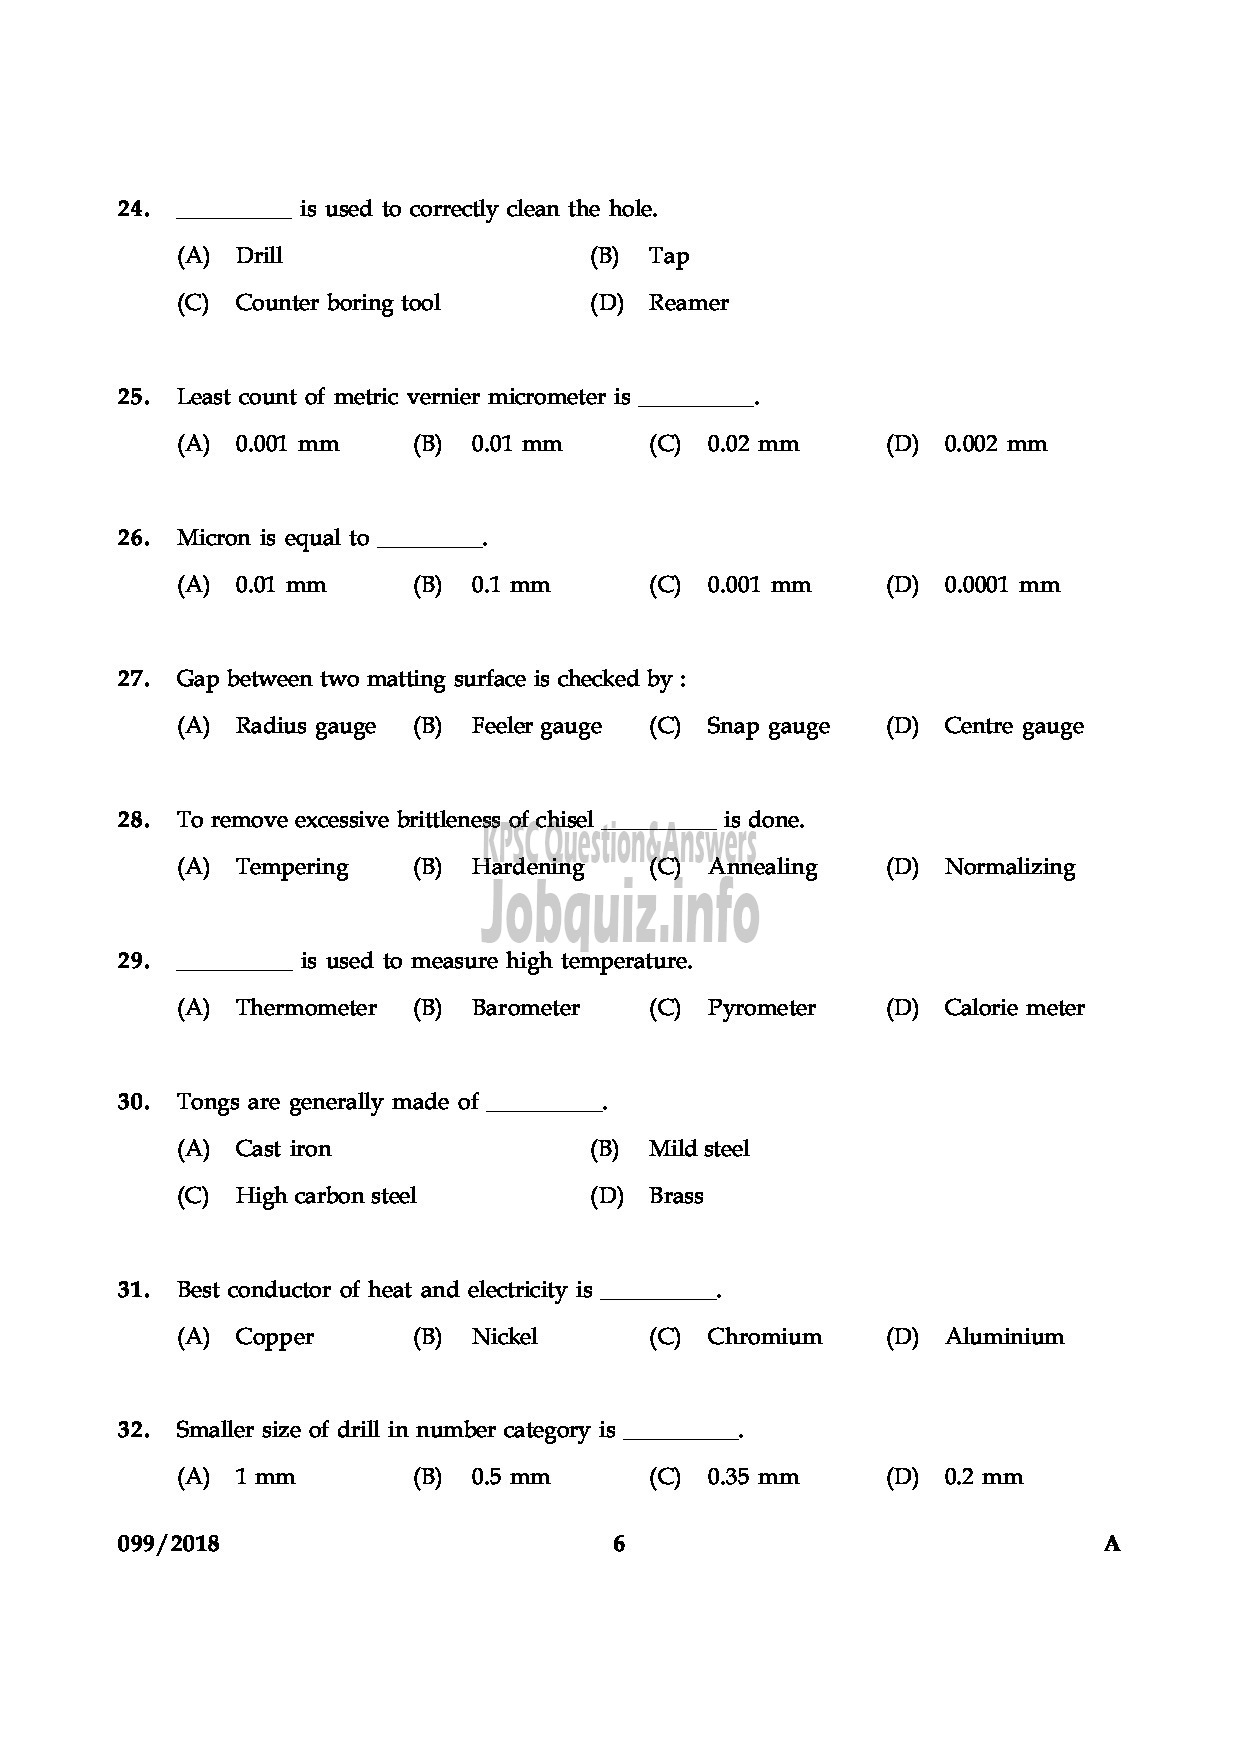 Kerala PSC Question Paper - JUNIOR INSTRUCTOR FITTER INDUSTRIAL TRAINING ENGLISH -6